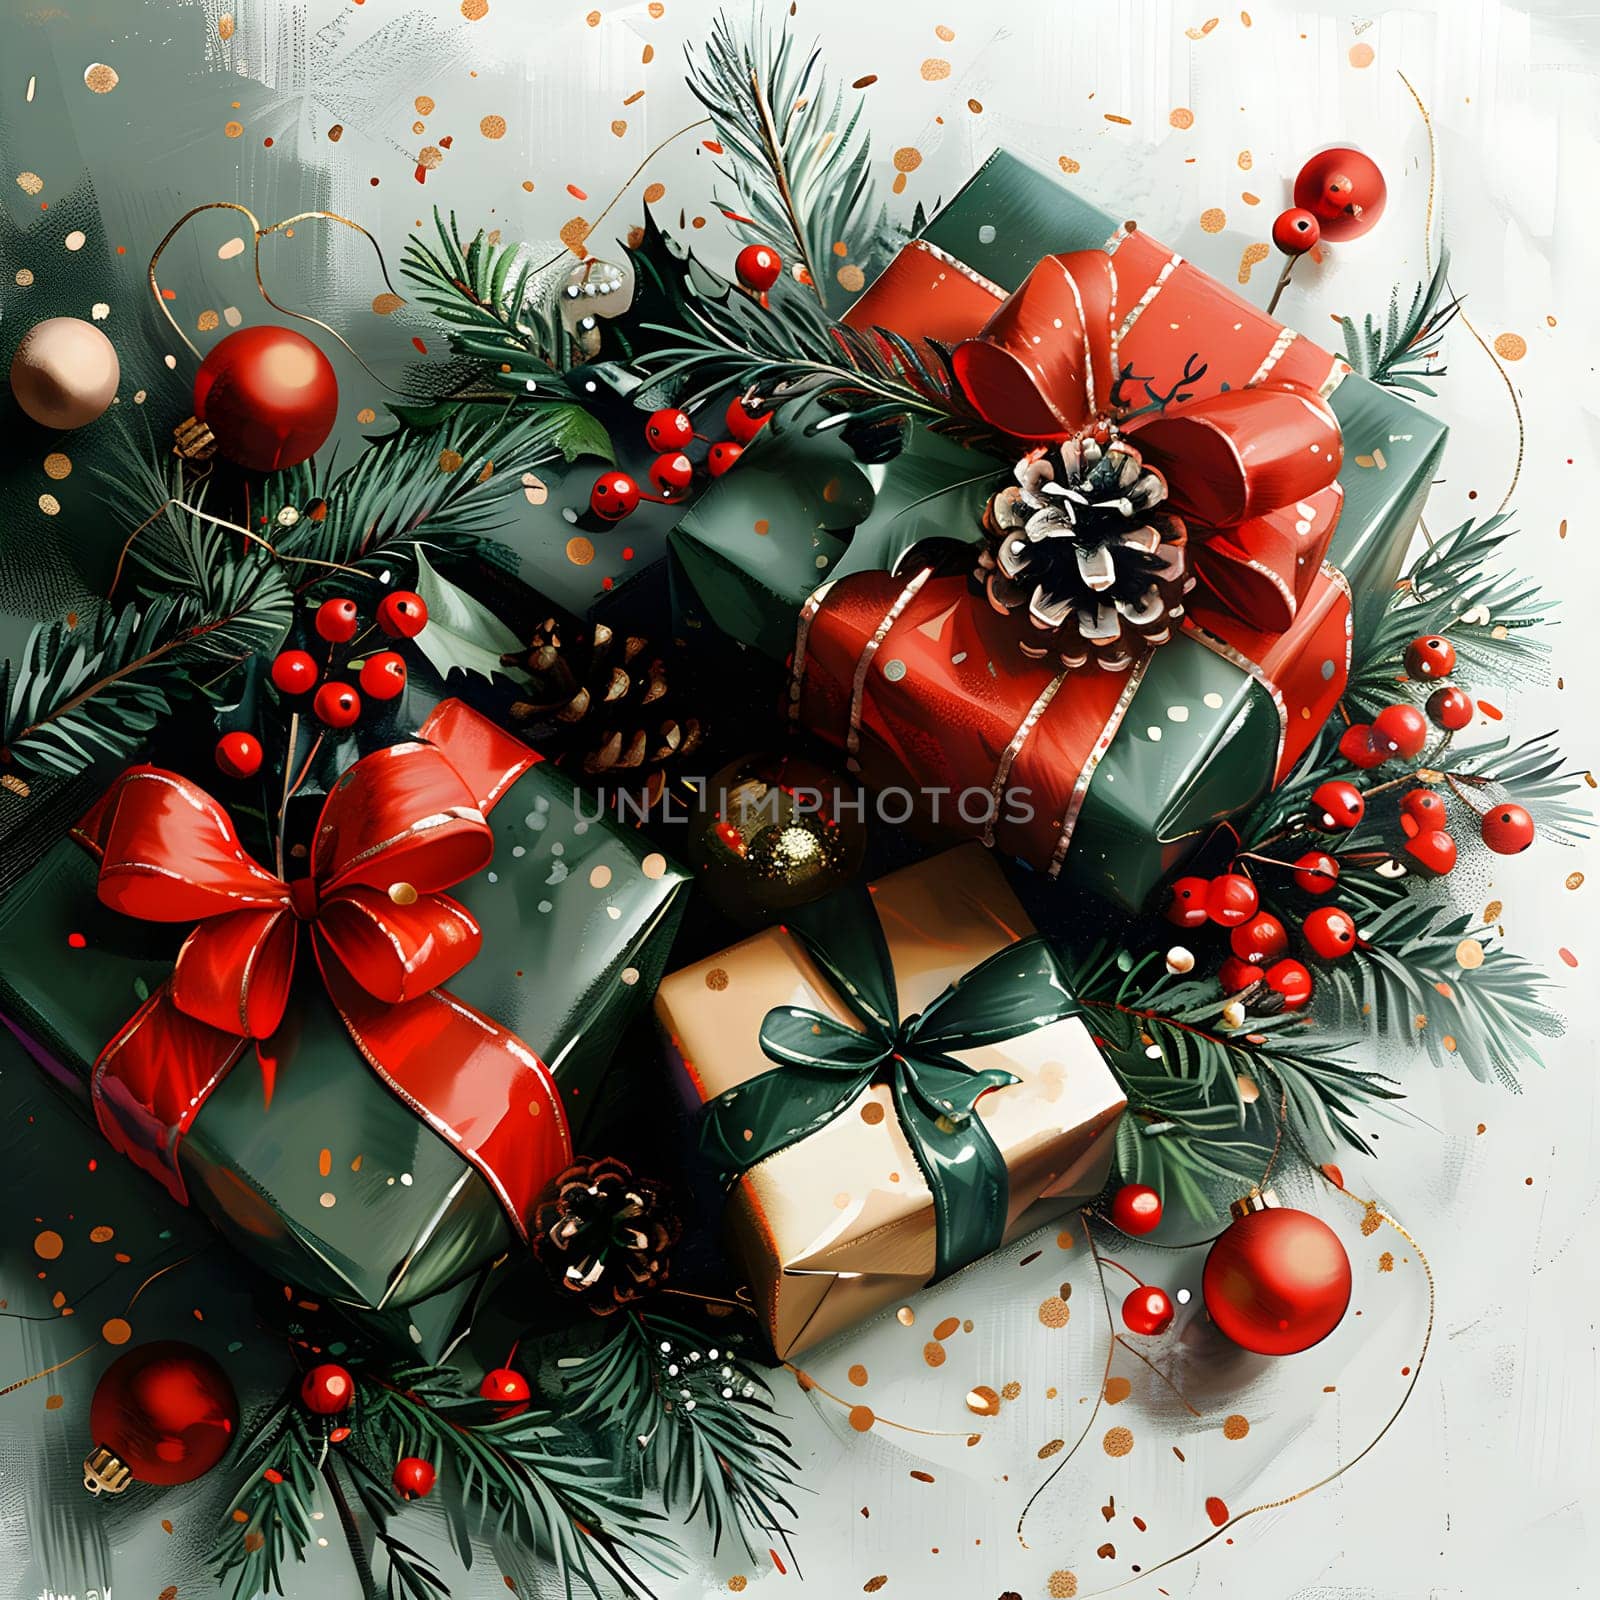 Assorted Christmas ornaments wrapped in green paper with red bows by Nadtochiy